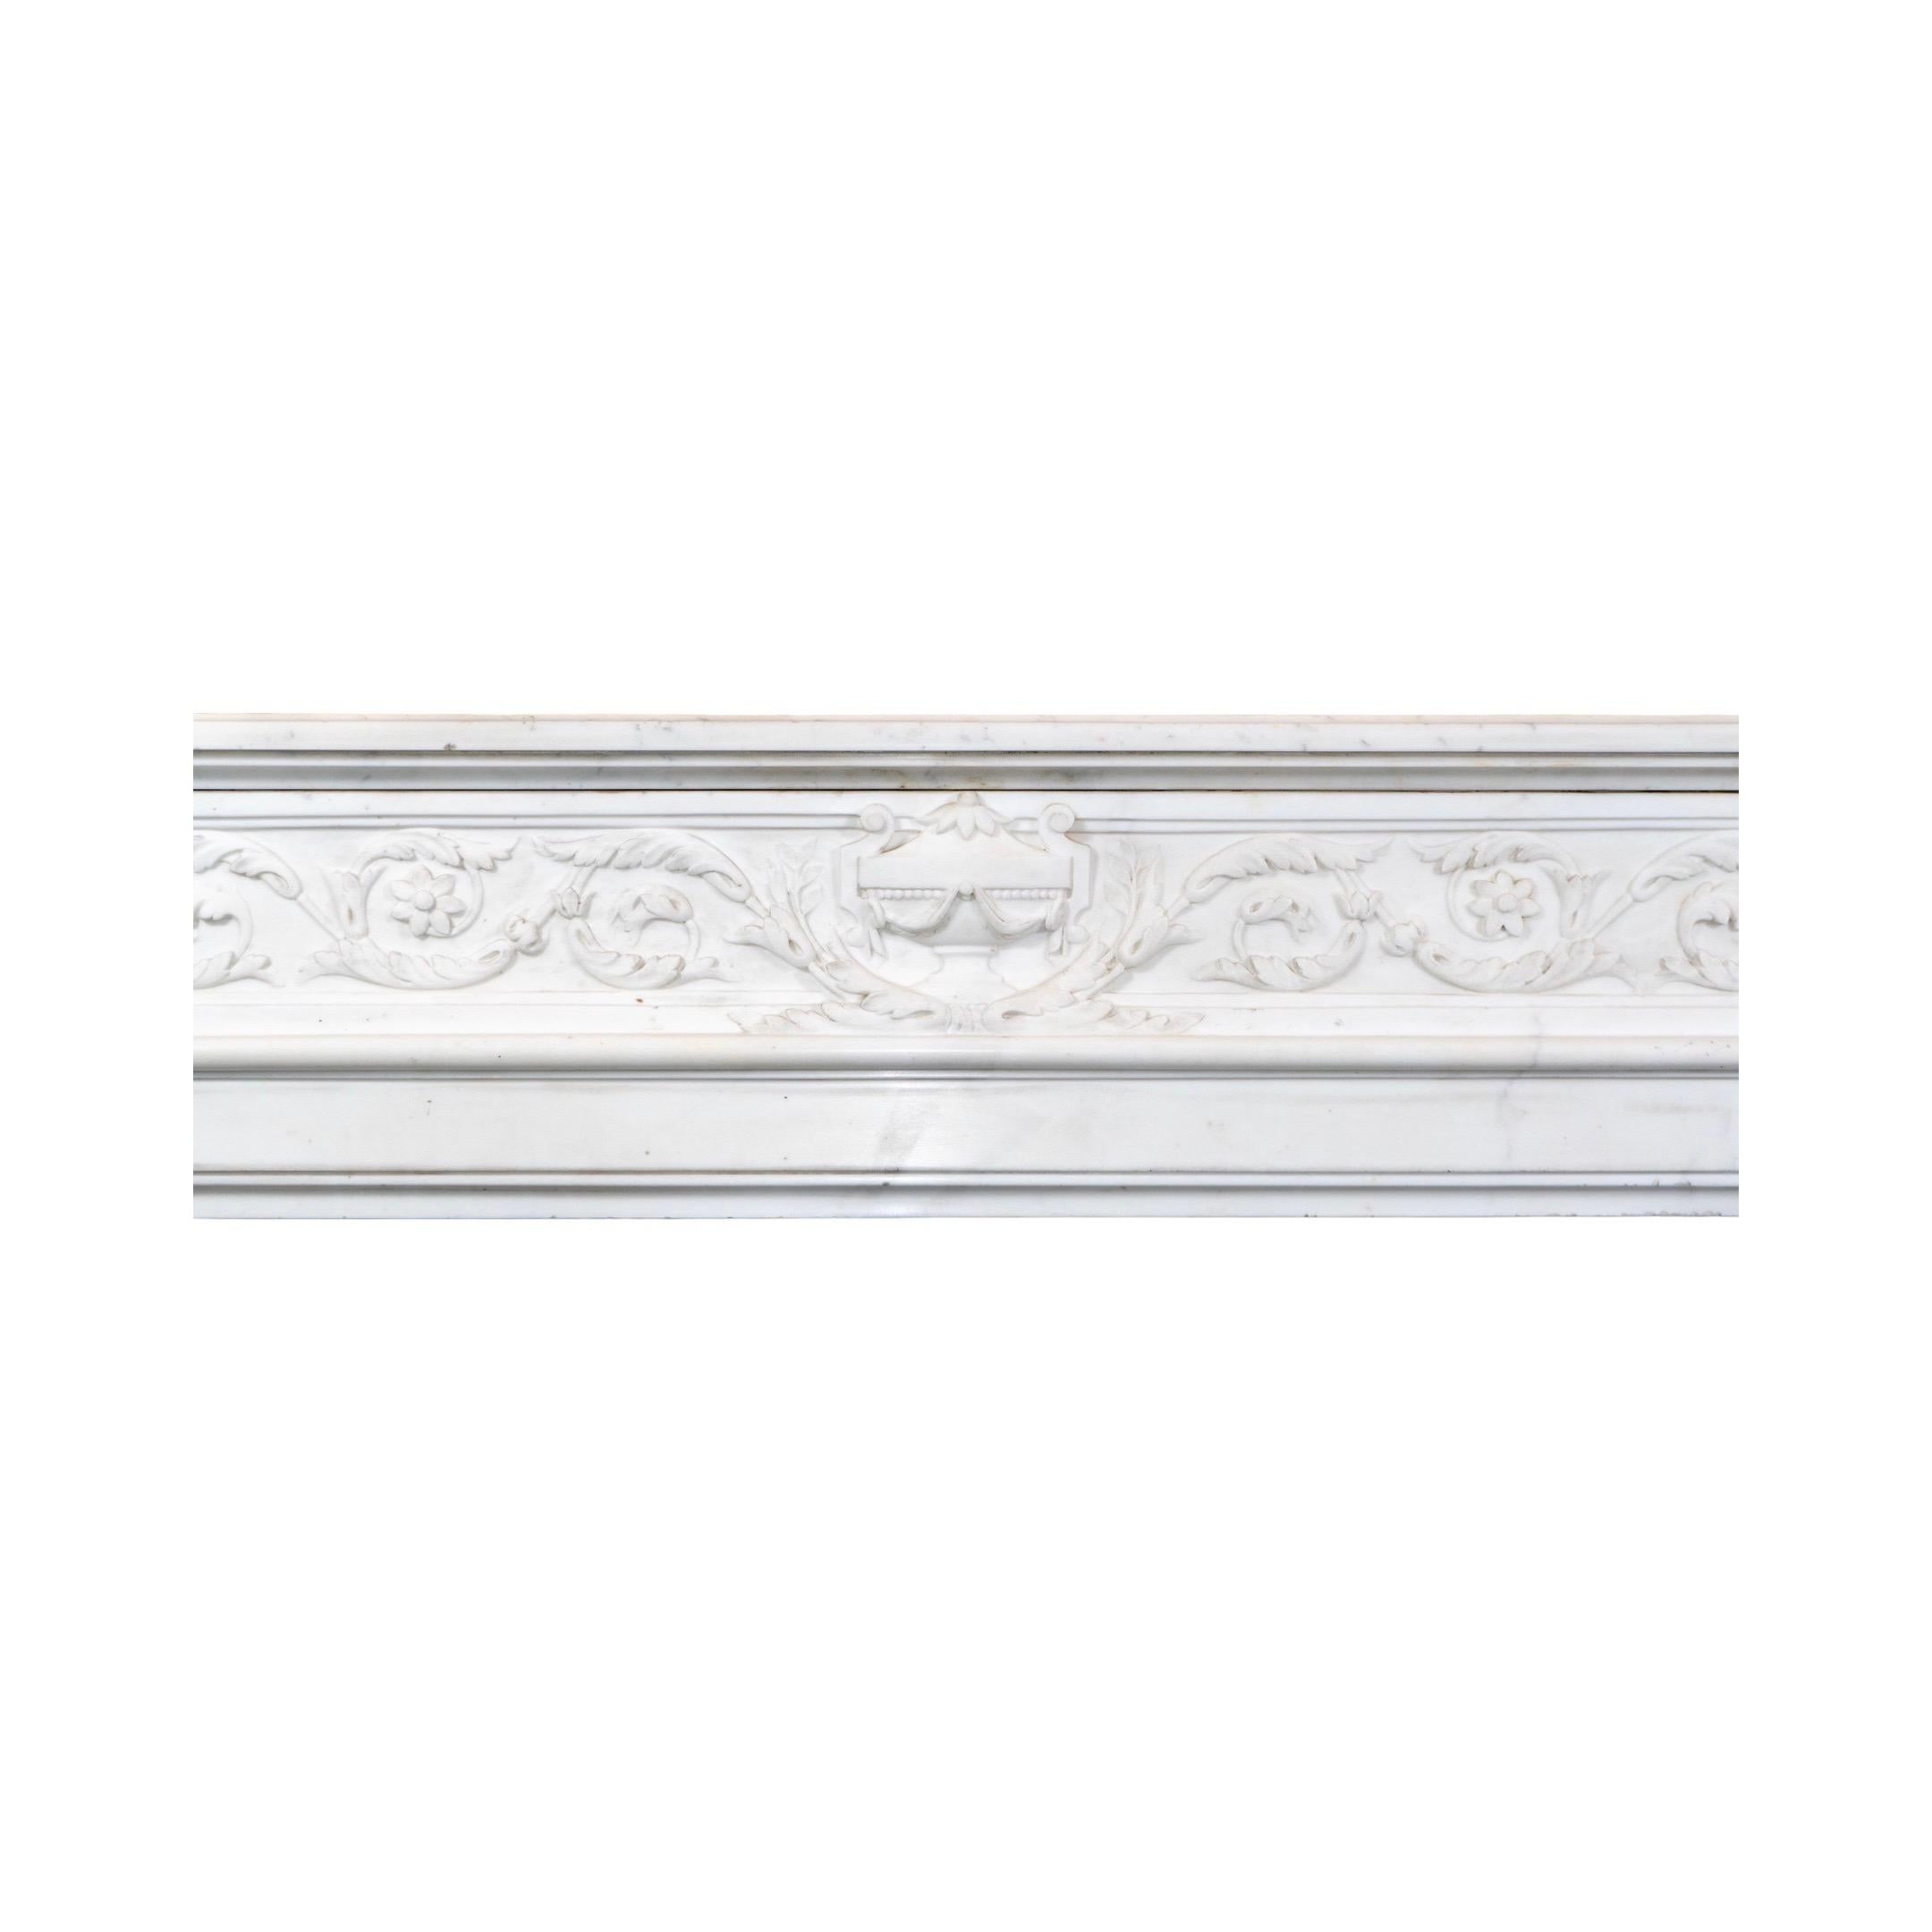 Mid-19th Century Carrara Marble Mantel from France For Sale 5